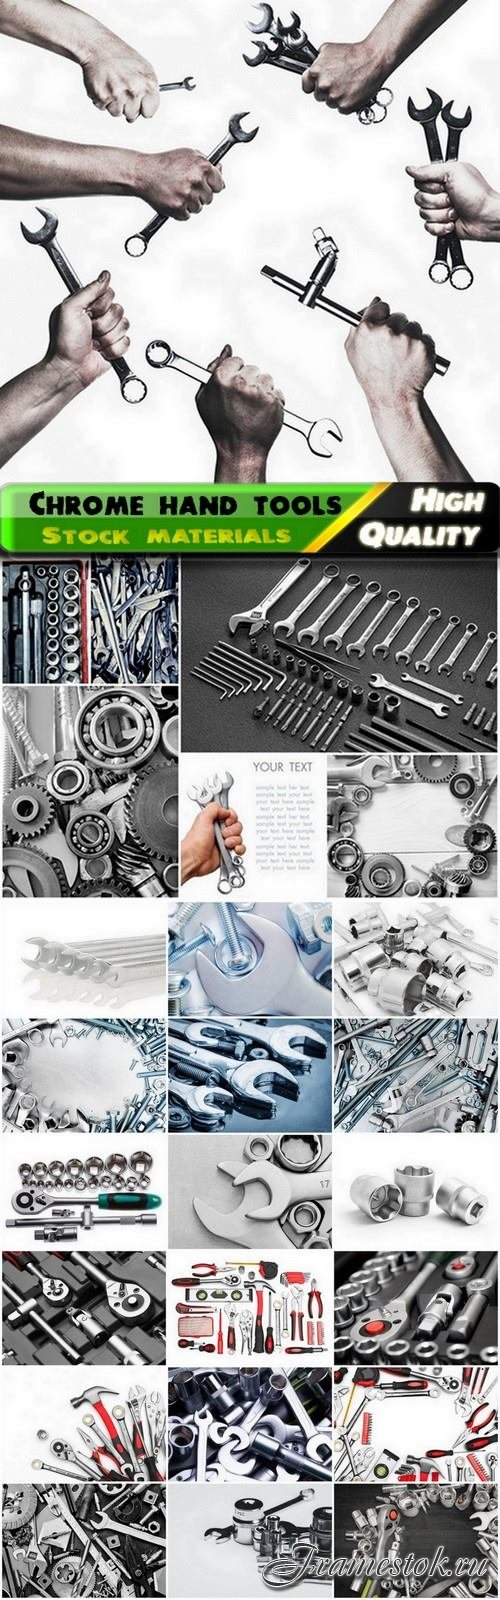 Chrome hand tools wrenches and bolts - 25 HQ Jpg